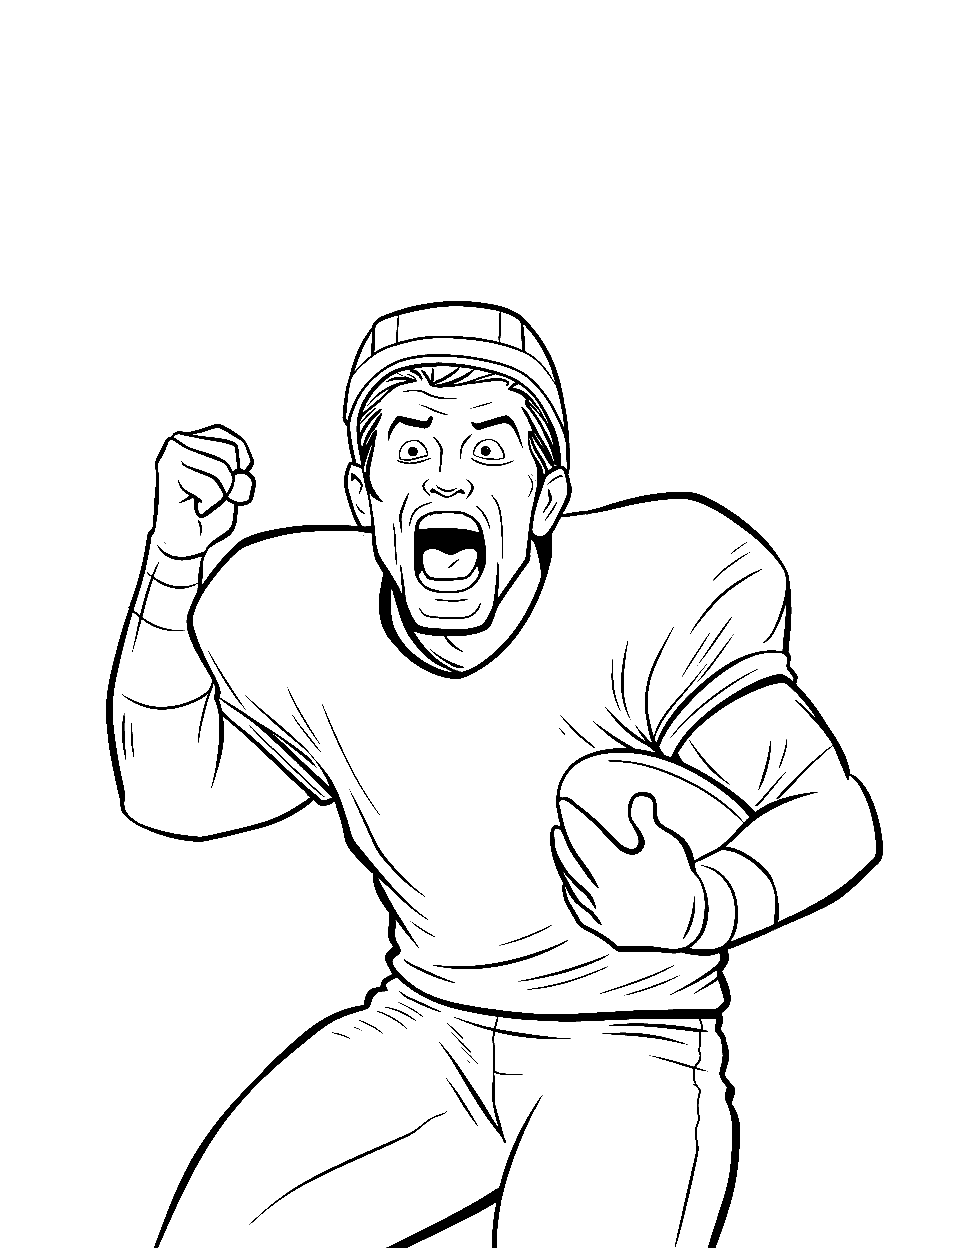 Bold Celebration Coloring Page - A player yelling a celebration song after scoring an amazing goal.